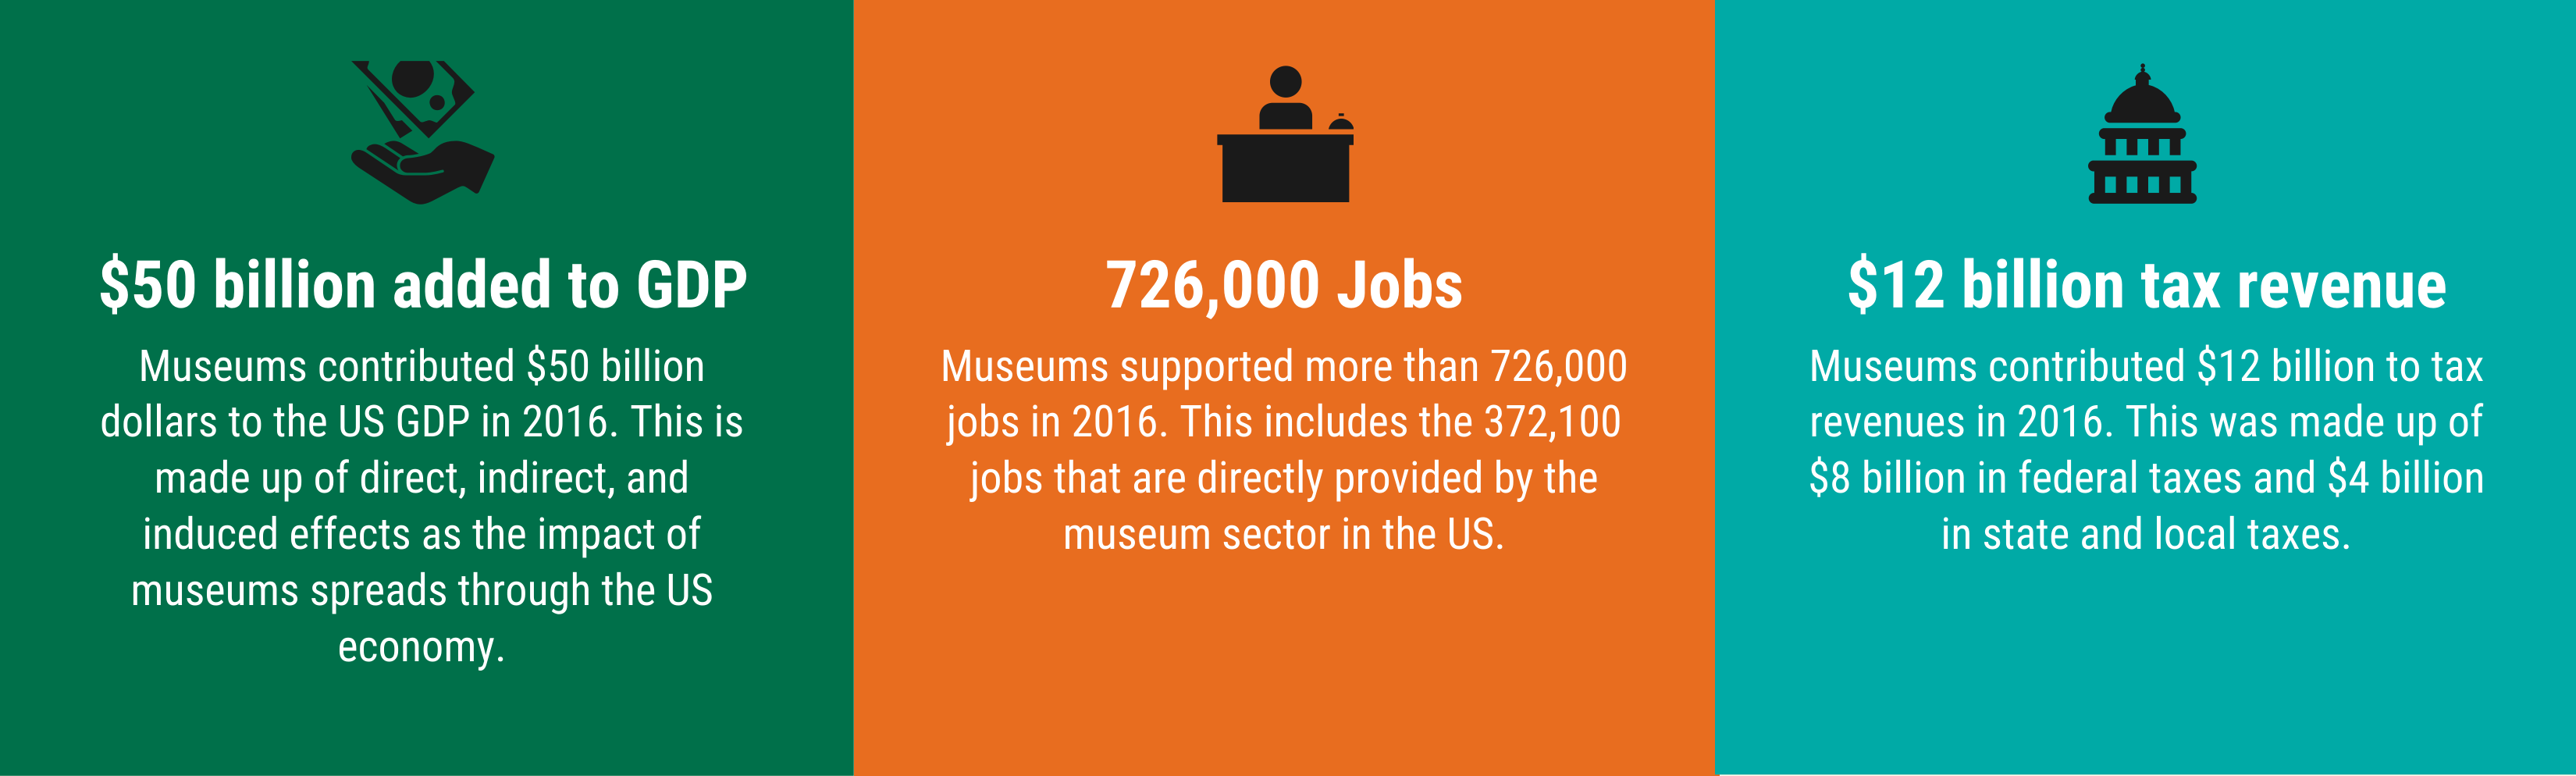 Infographic: Museums add $50b to GDP; 726k jobs, $12b in taxes each year